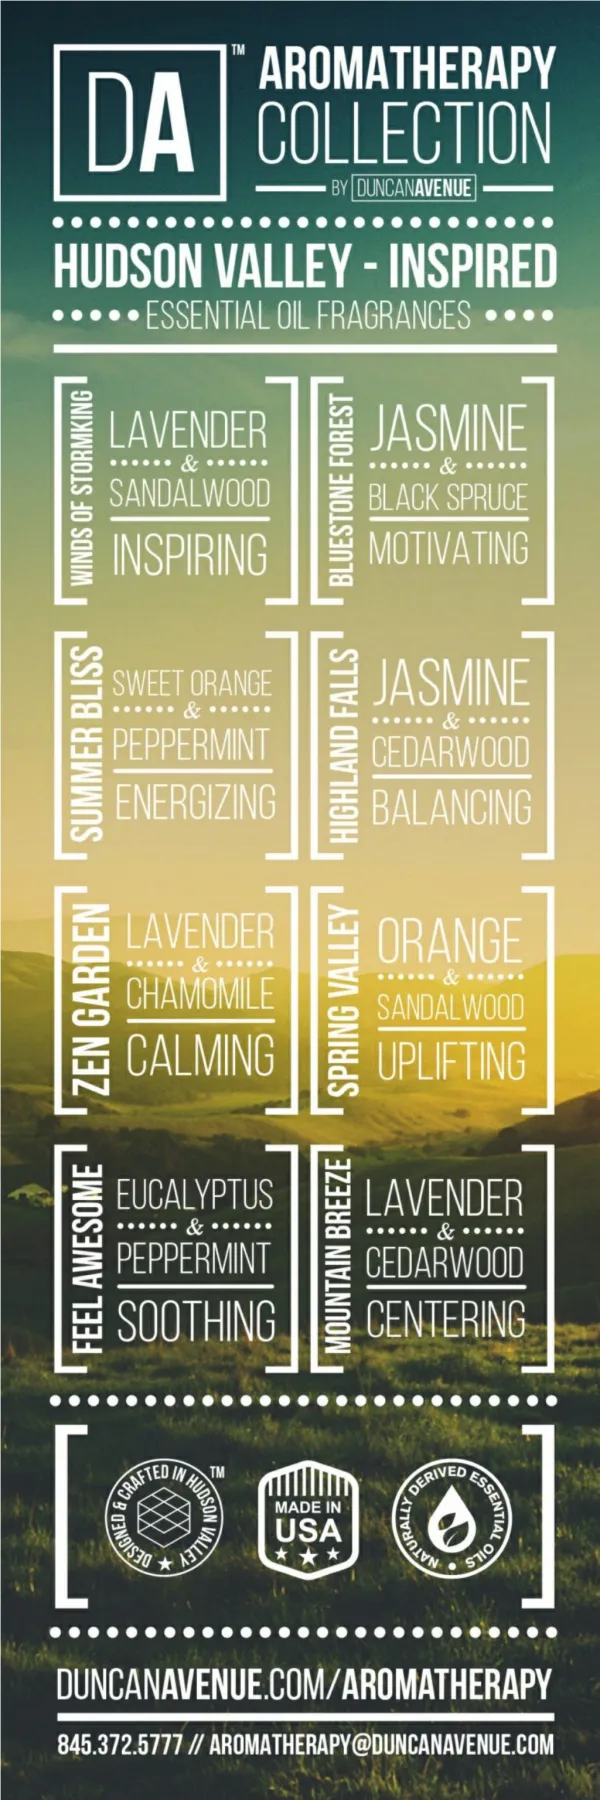 DA Aromatherapy Collection Infographic about Organic Essential Oils